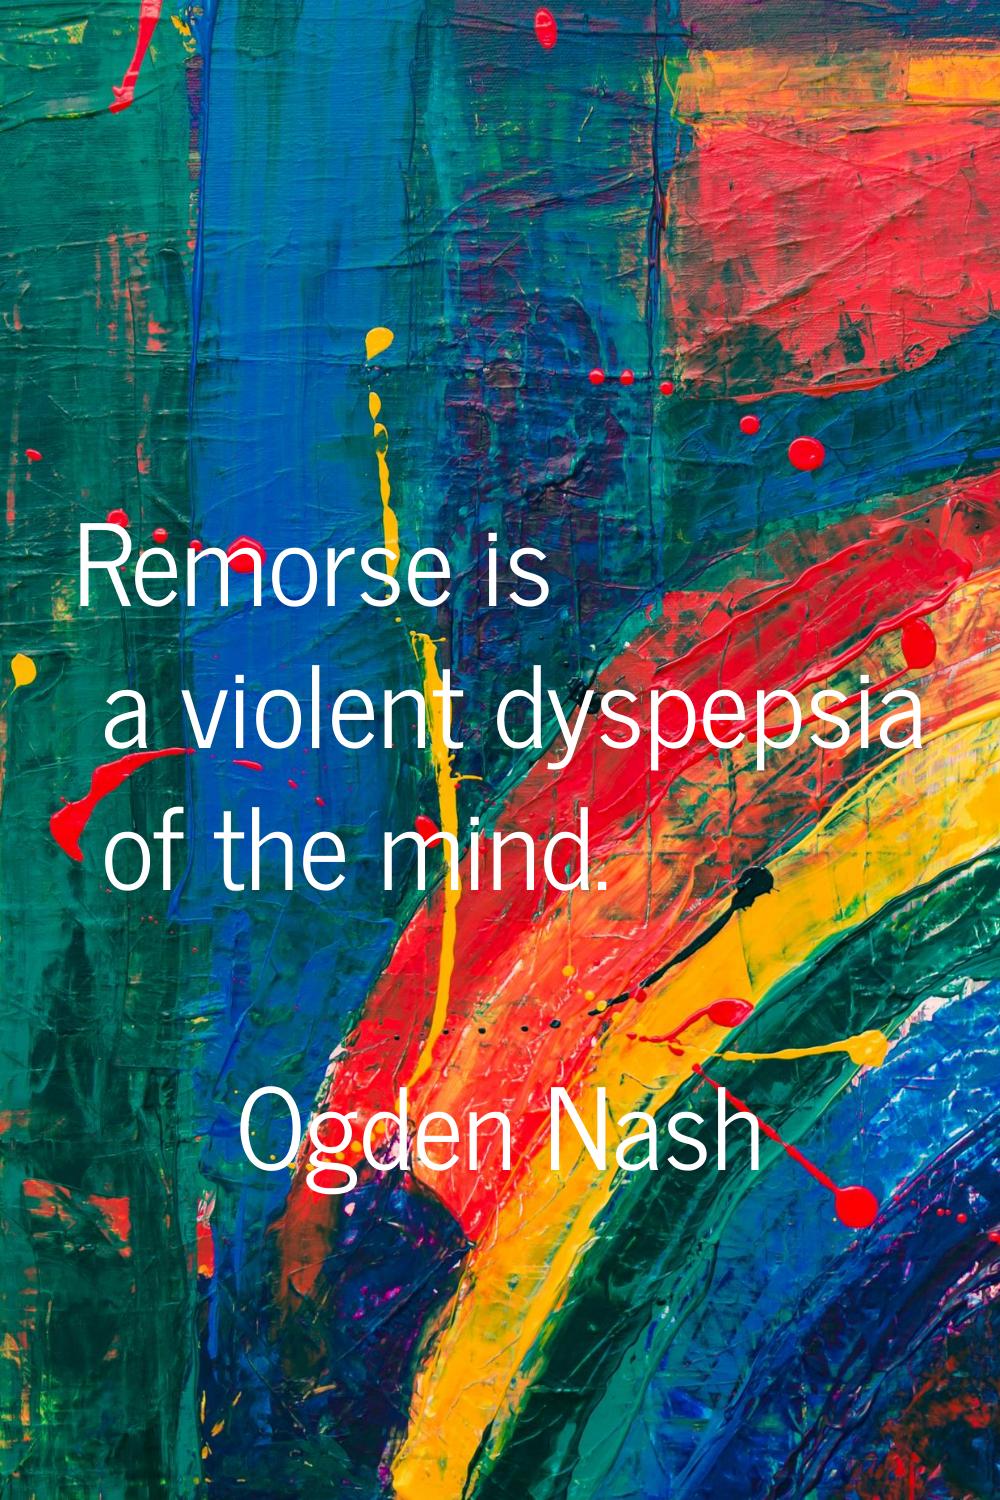 Remorse is a violent dyspepsia of the mind.